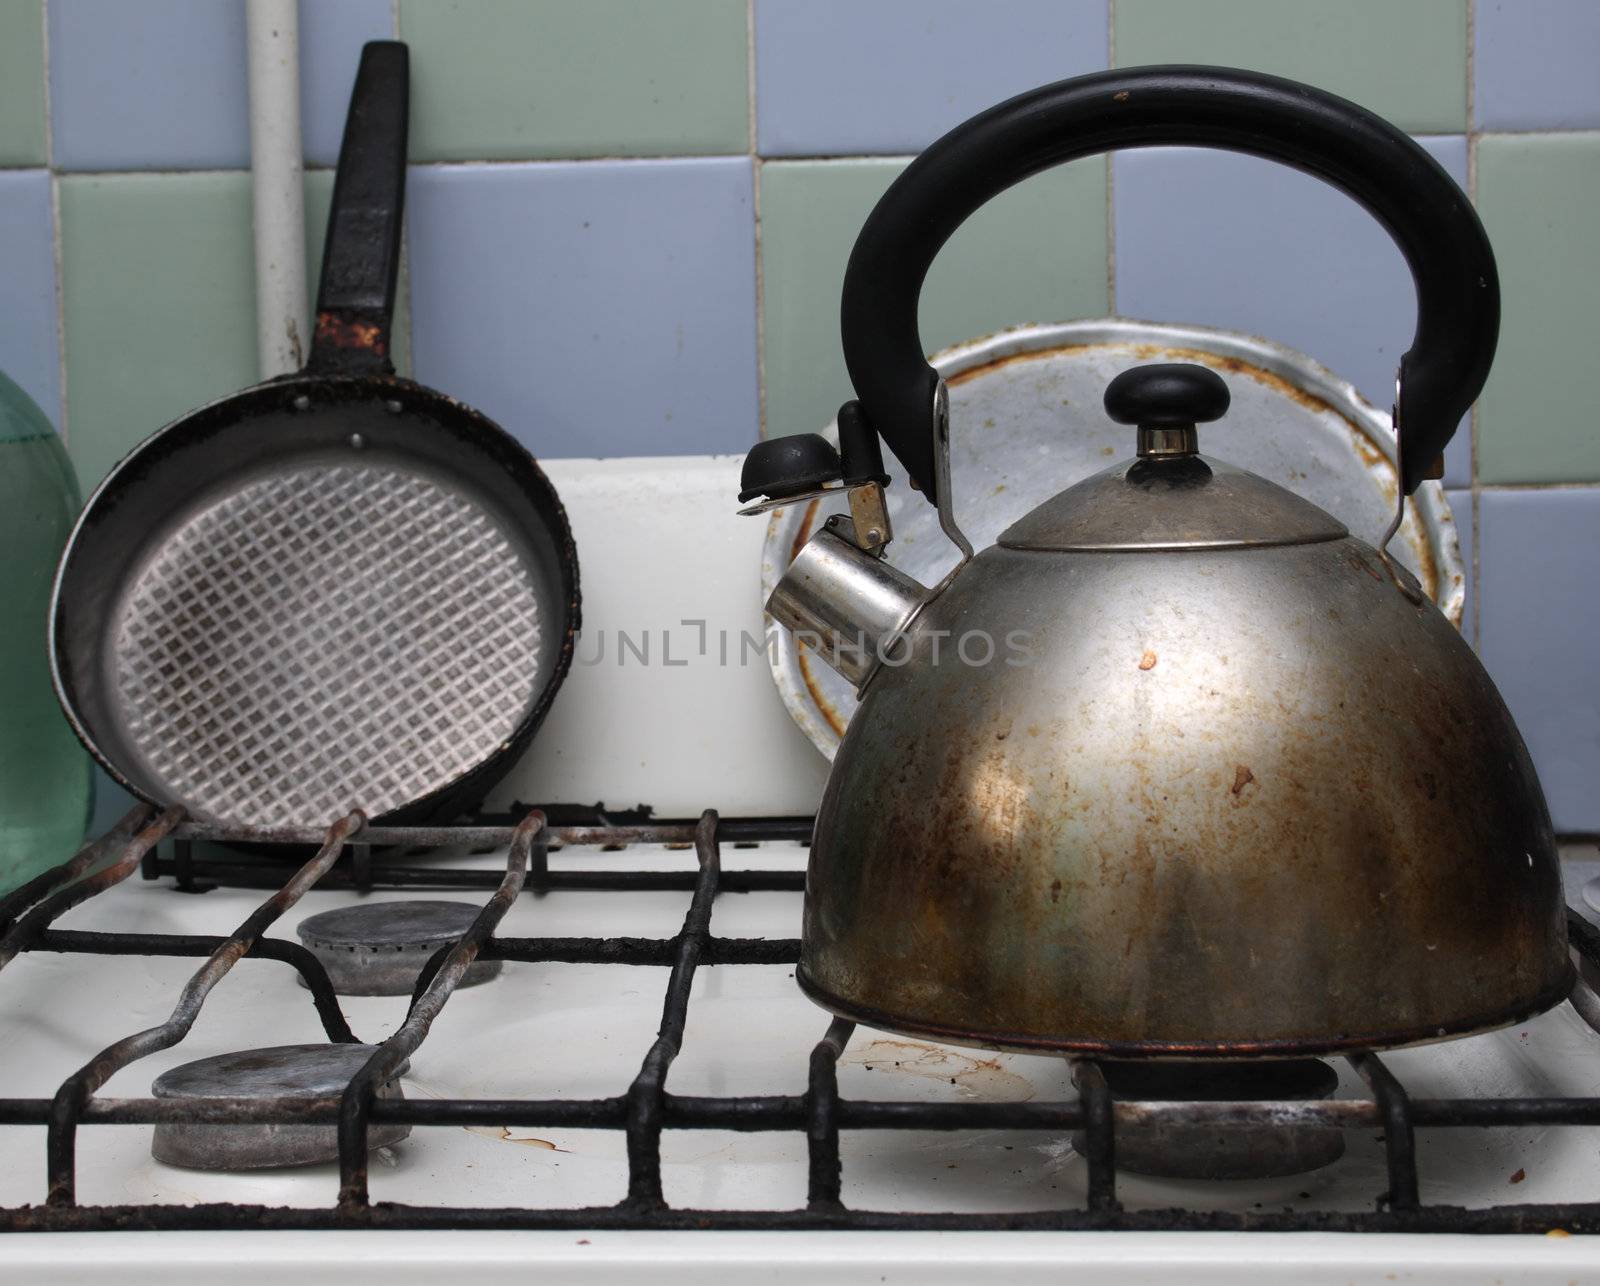 Dirty gas stove with teakettle and frying pan on it.